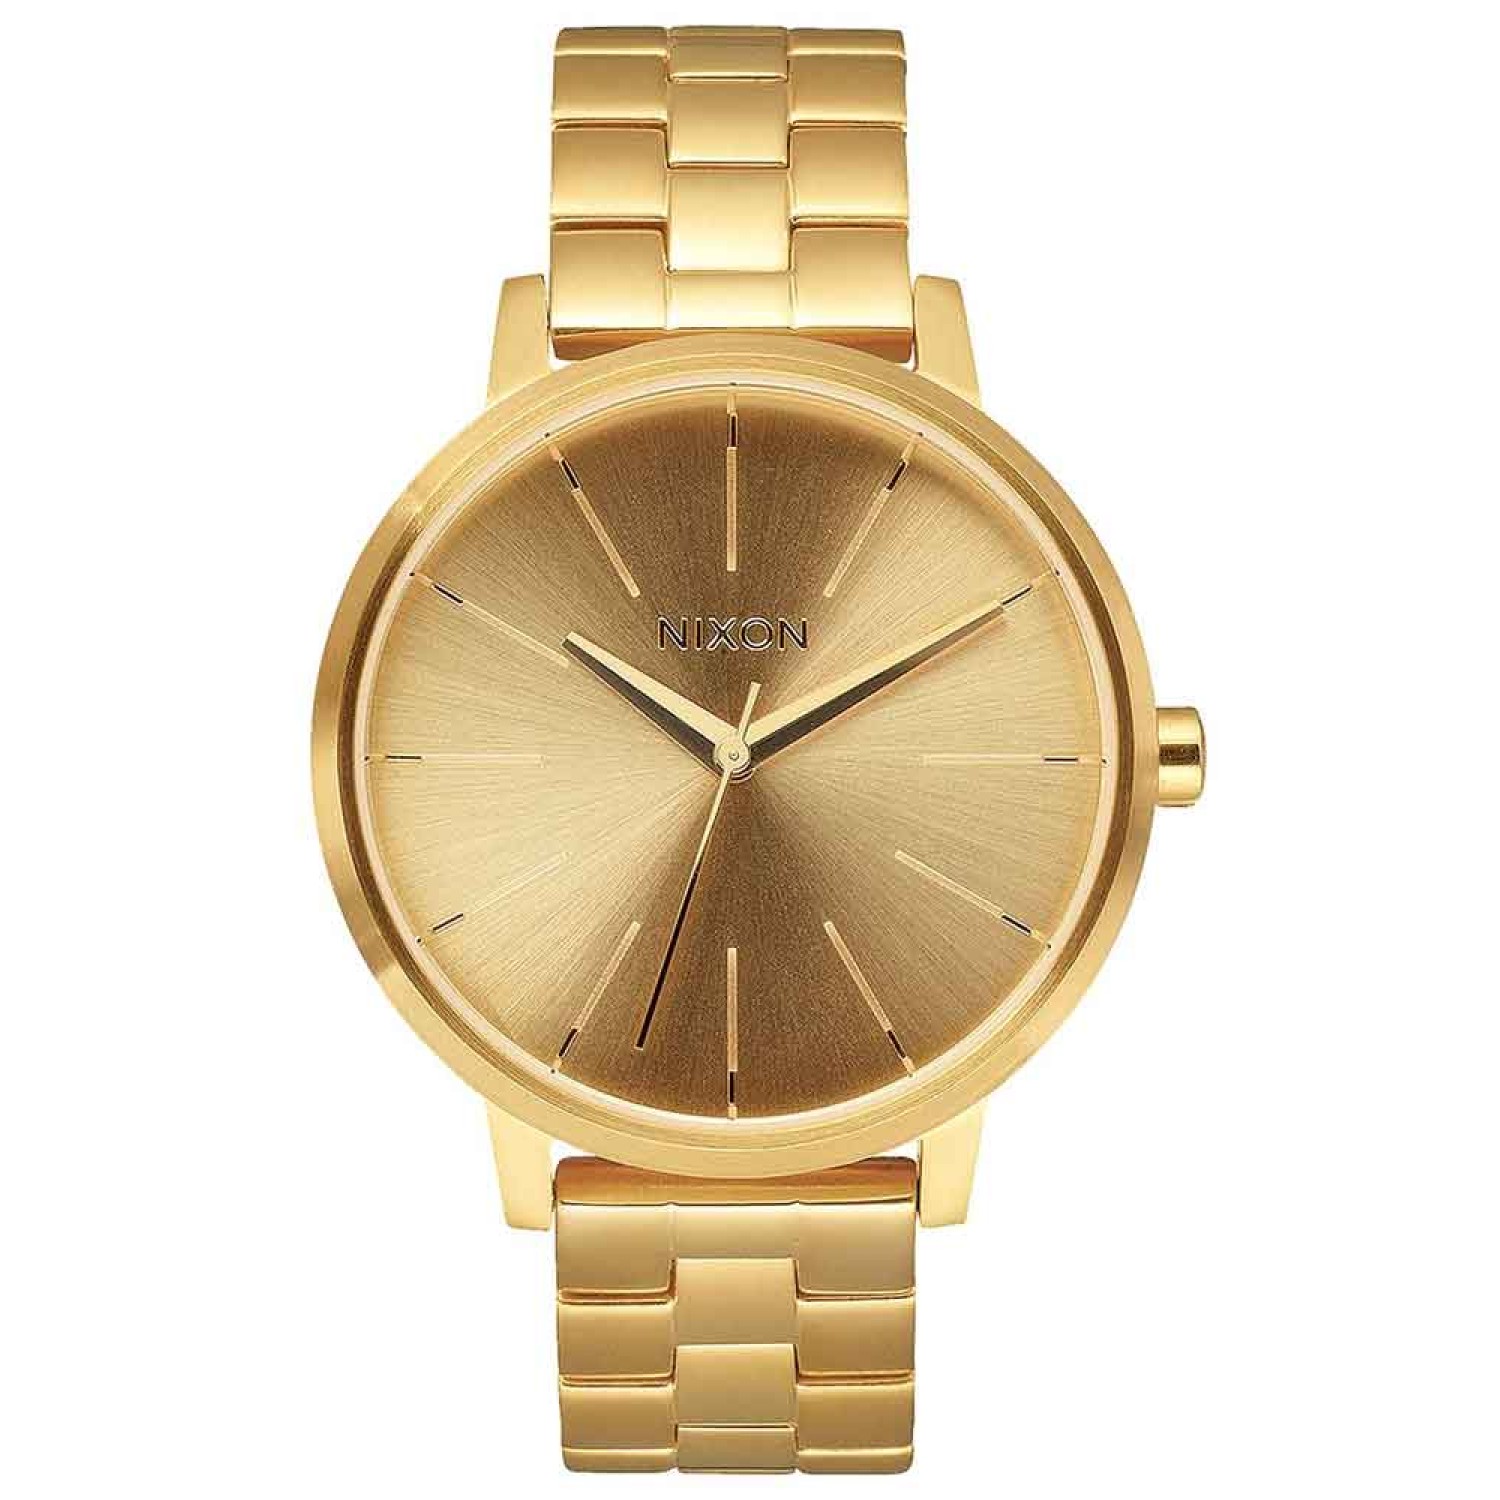 A099502 NIXON Ladies The Kensington Gold Watch. Classic ladies A099502  Nixon The Kensington model in PVD gold plating, set around an elegant dial with slender baton hour markers. 2 Year  Guarantee 3 Months No Payments and Interest for Q Card holders T @c